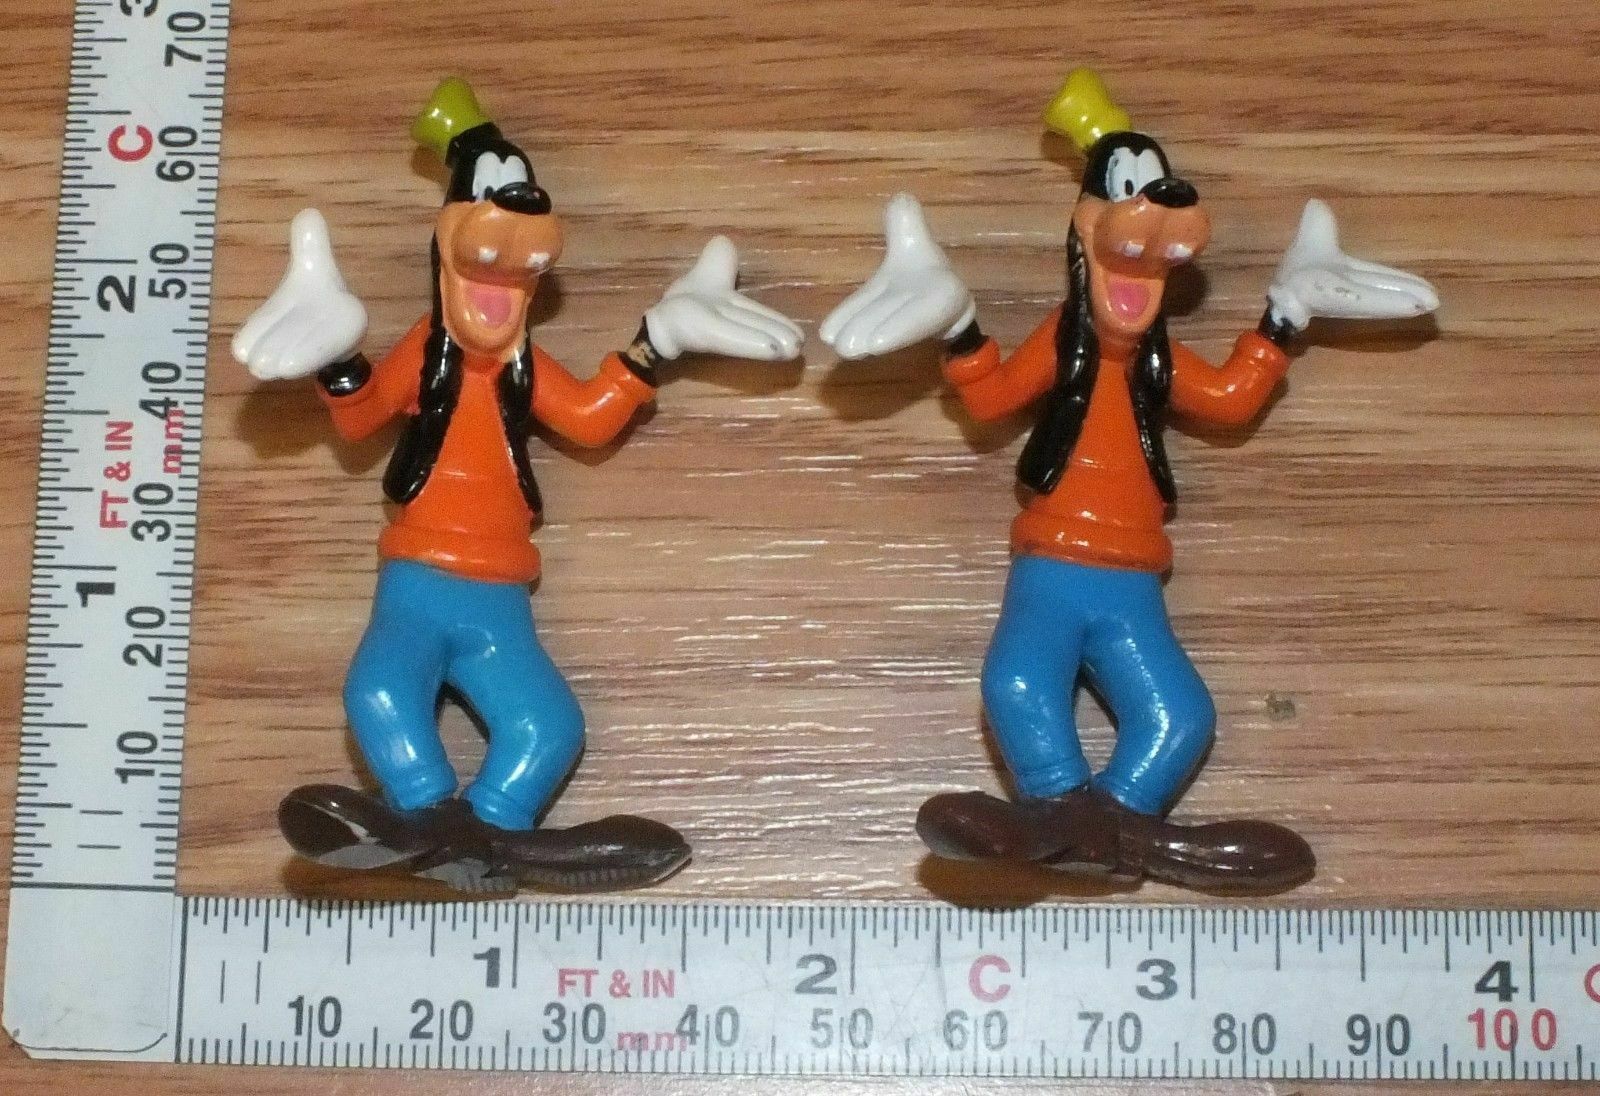 Genuine Disney Set Of 2 Goofy Character Pvc Figurine Cake Toppers *read*